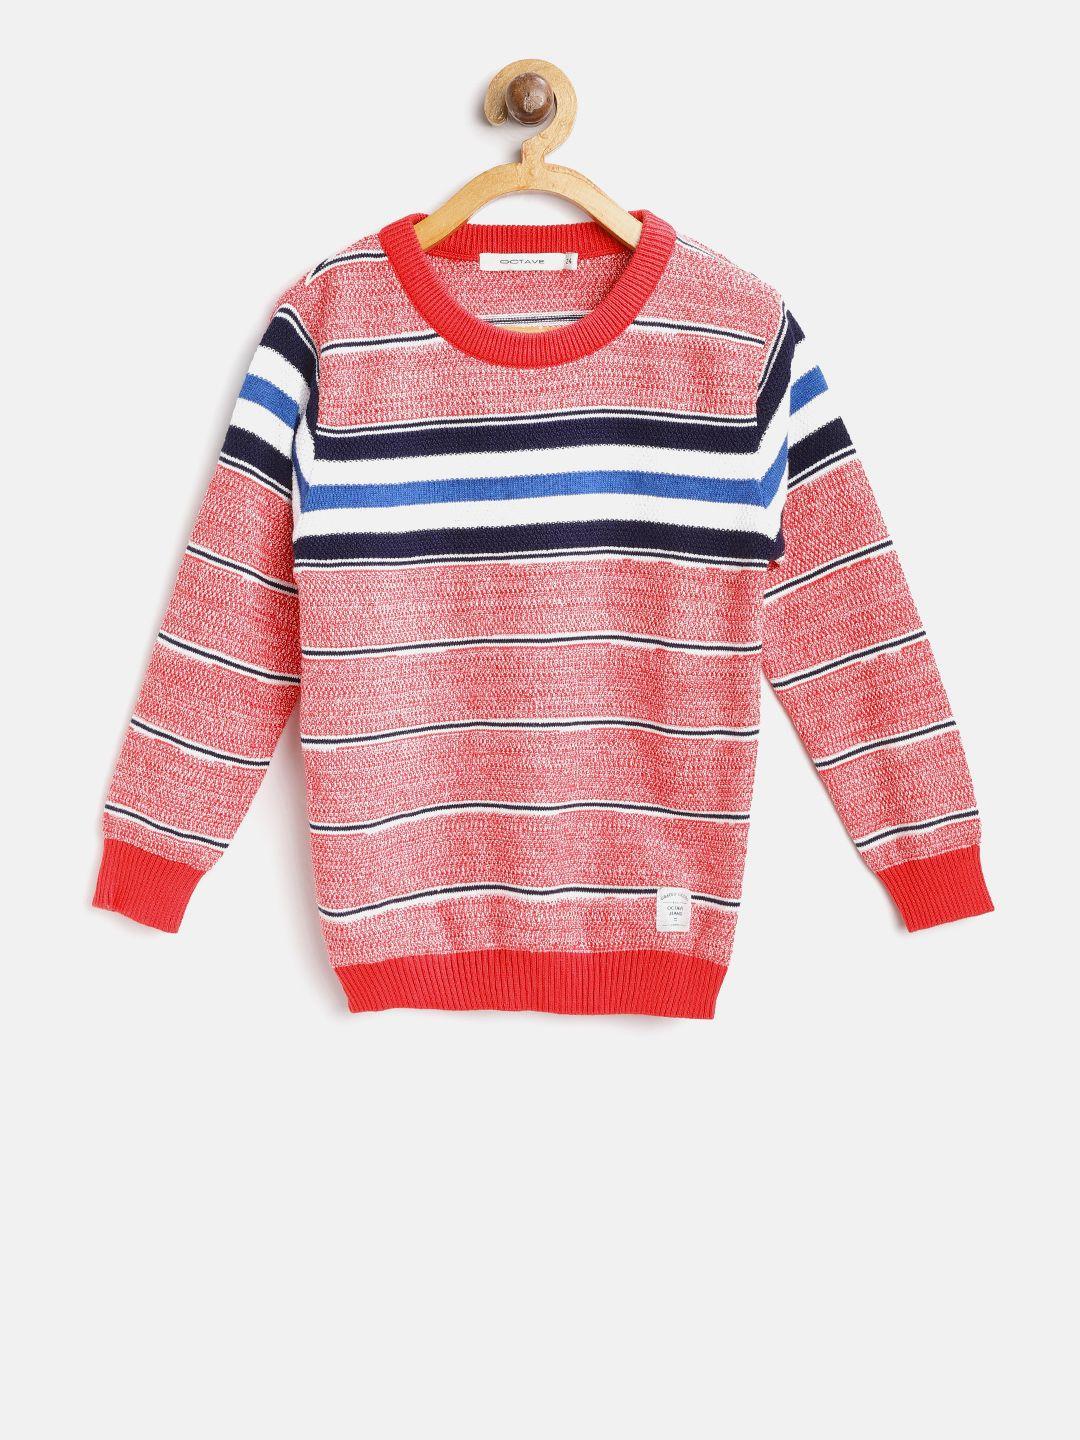 octave boys red & white striped pullover